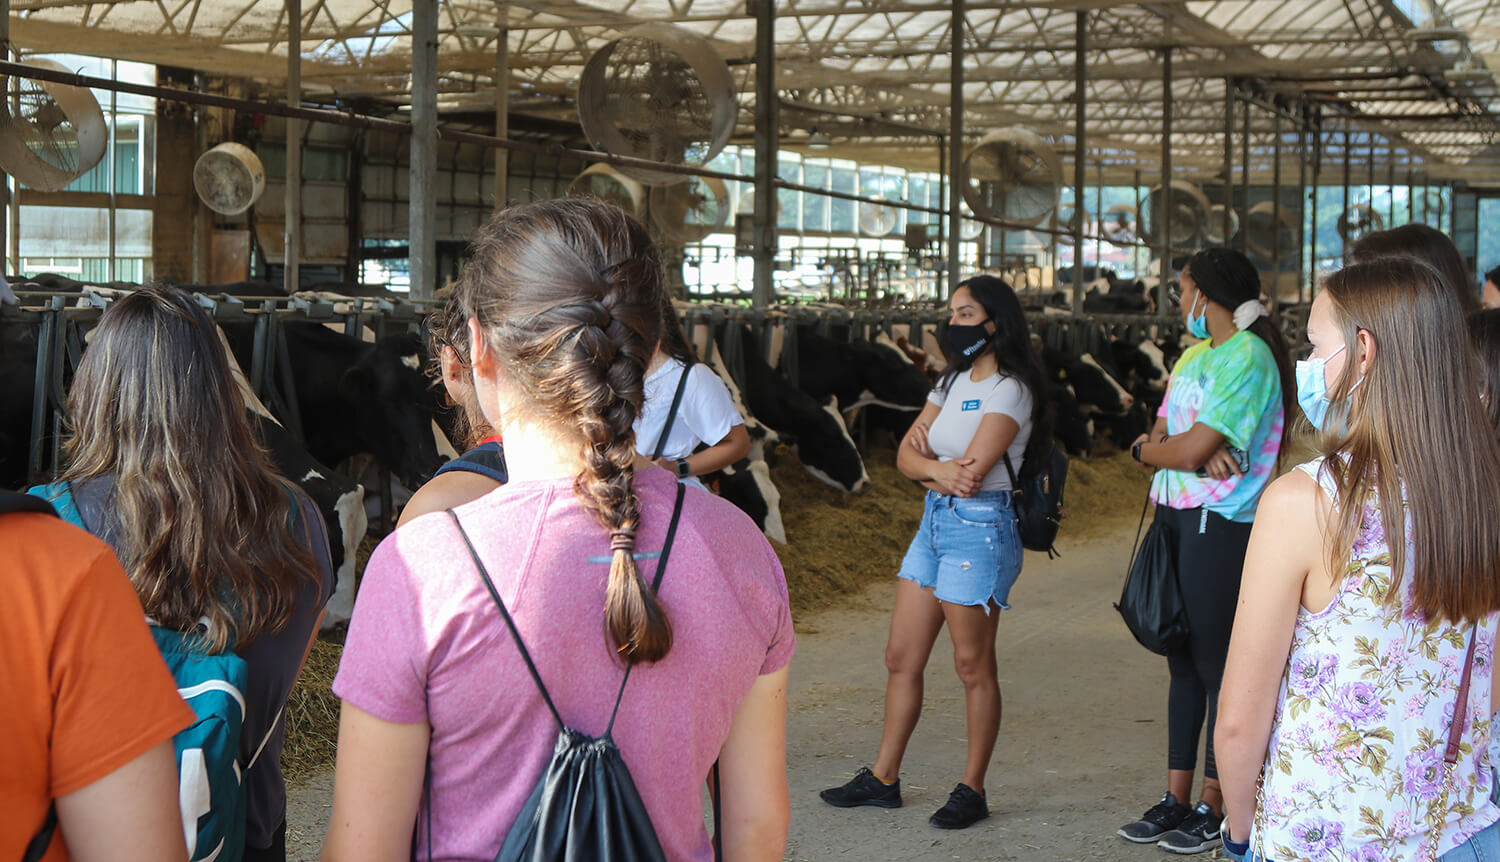 The students visit the Marshak Dairy during their tour of New Bolton Center.